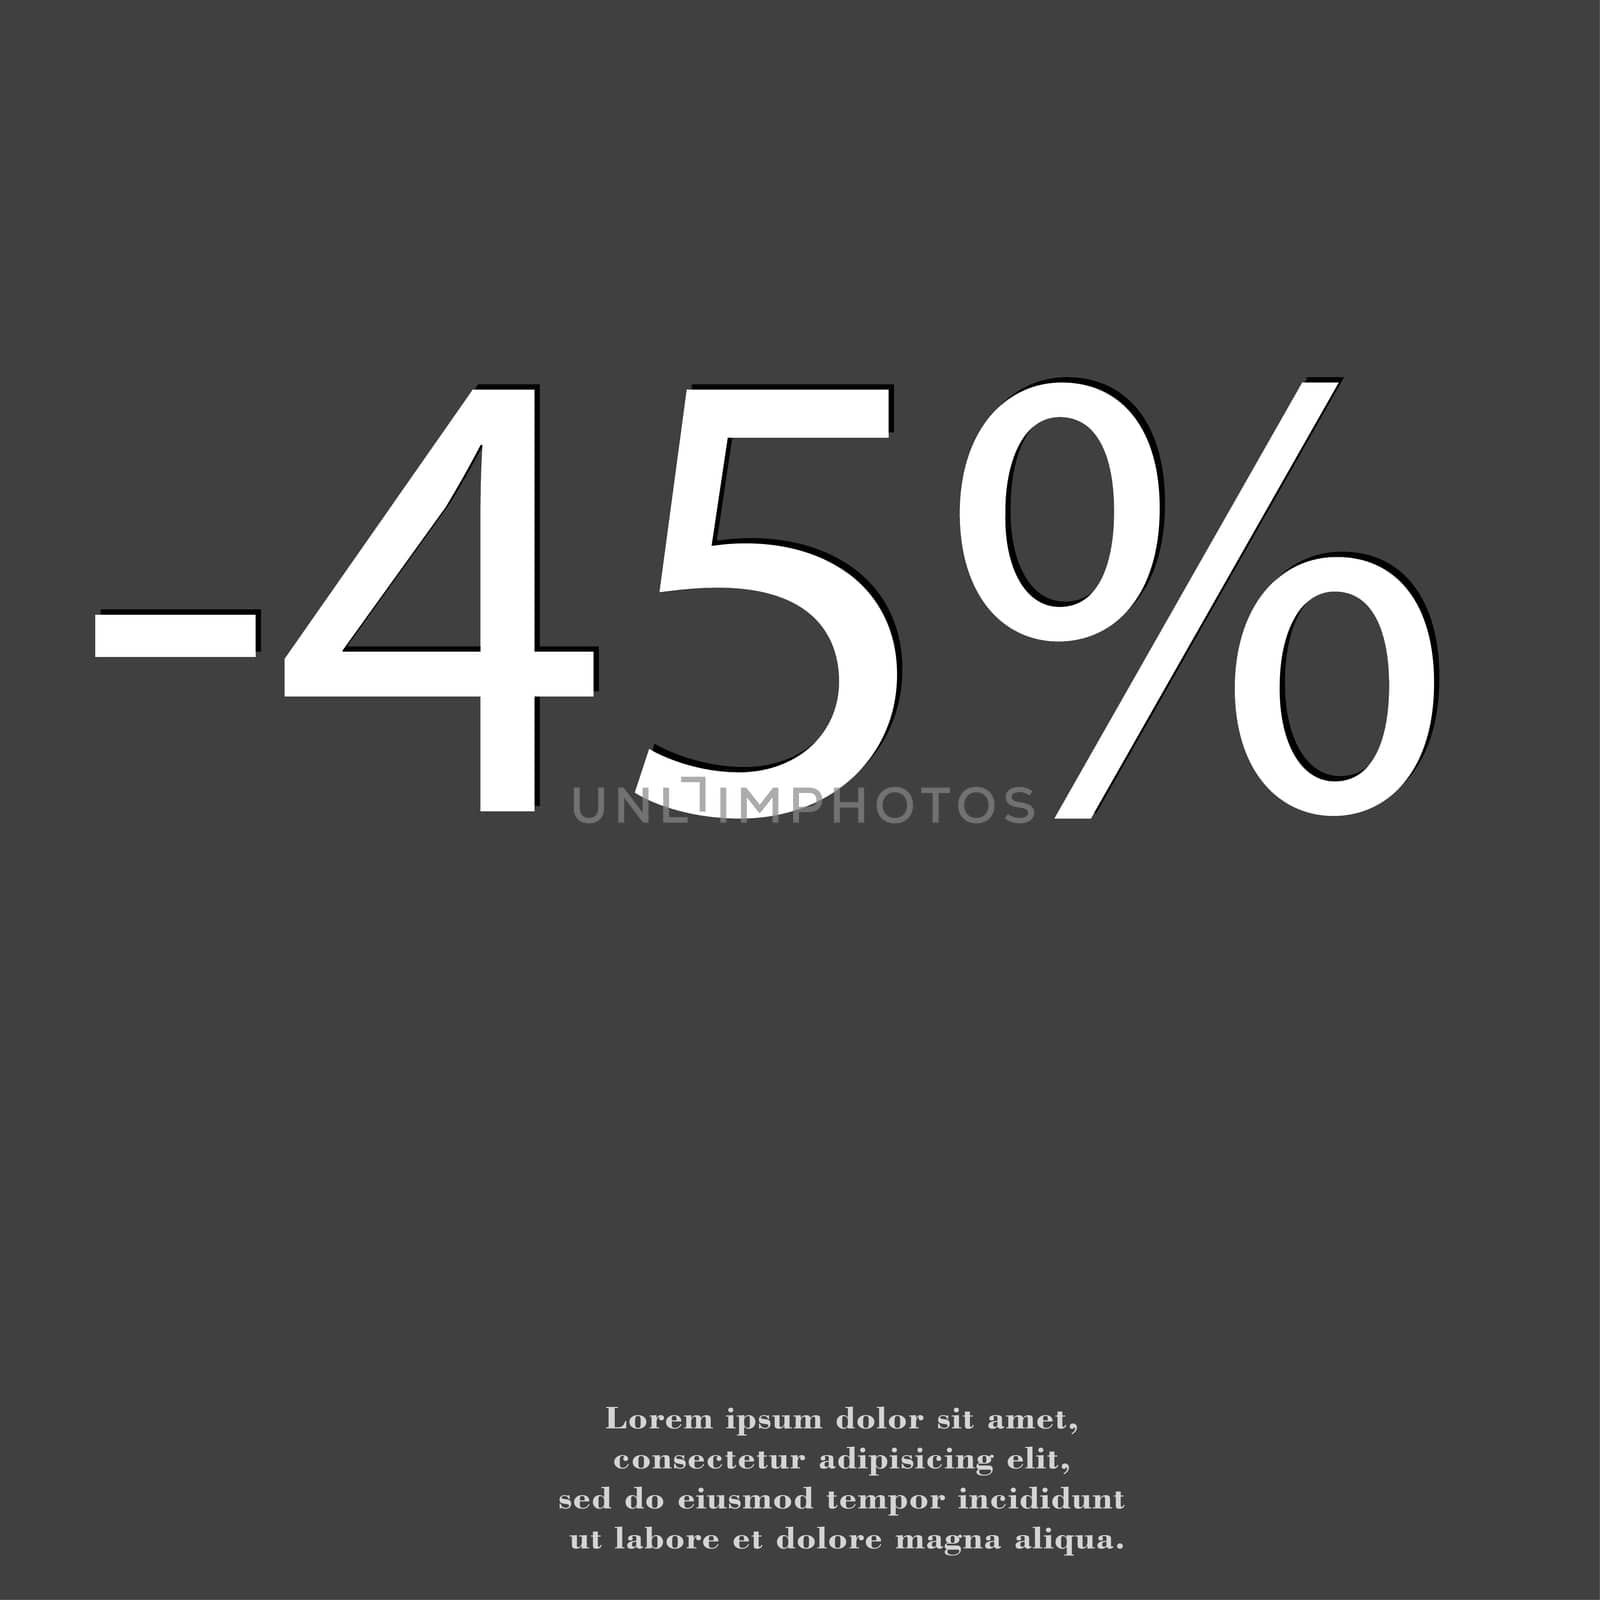 45 percent discount icon symbol Flat modern web design with long shadow and space for your text. illustration